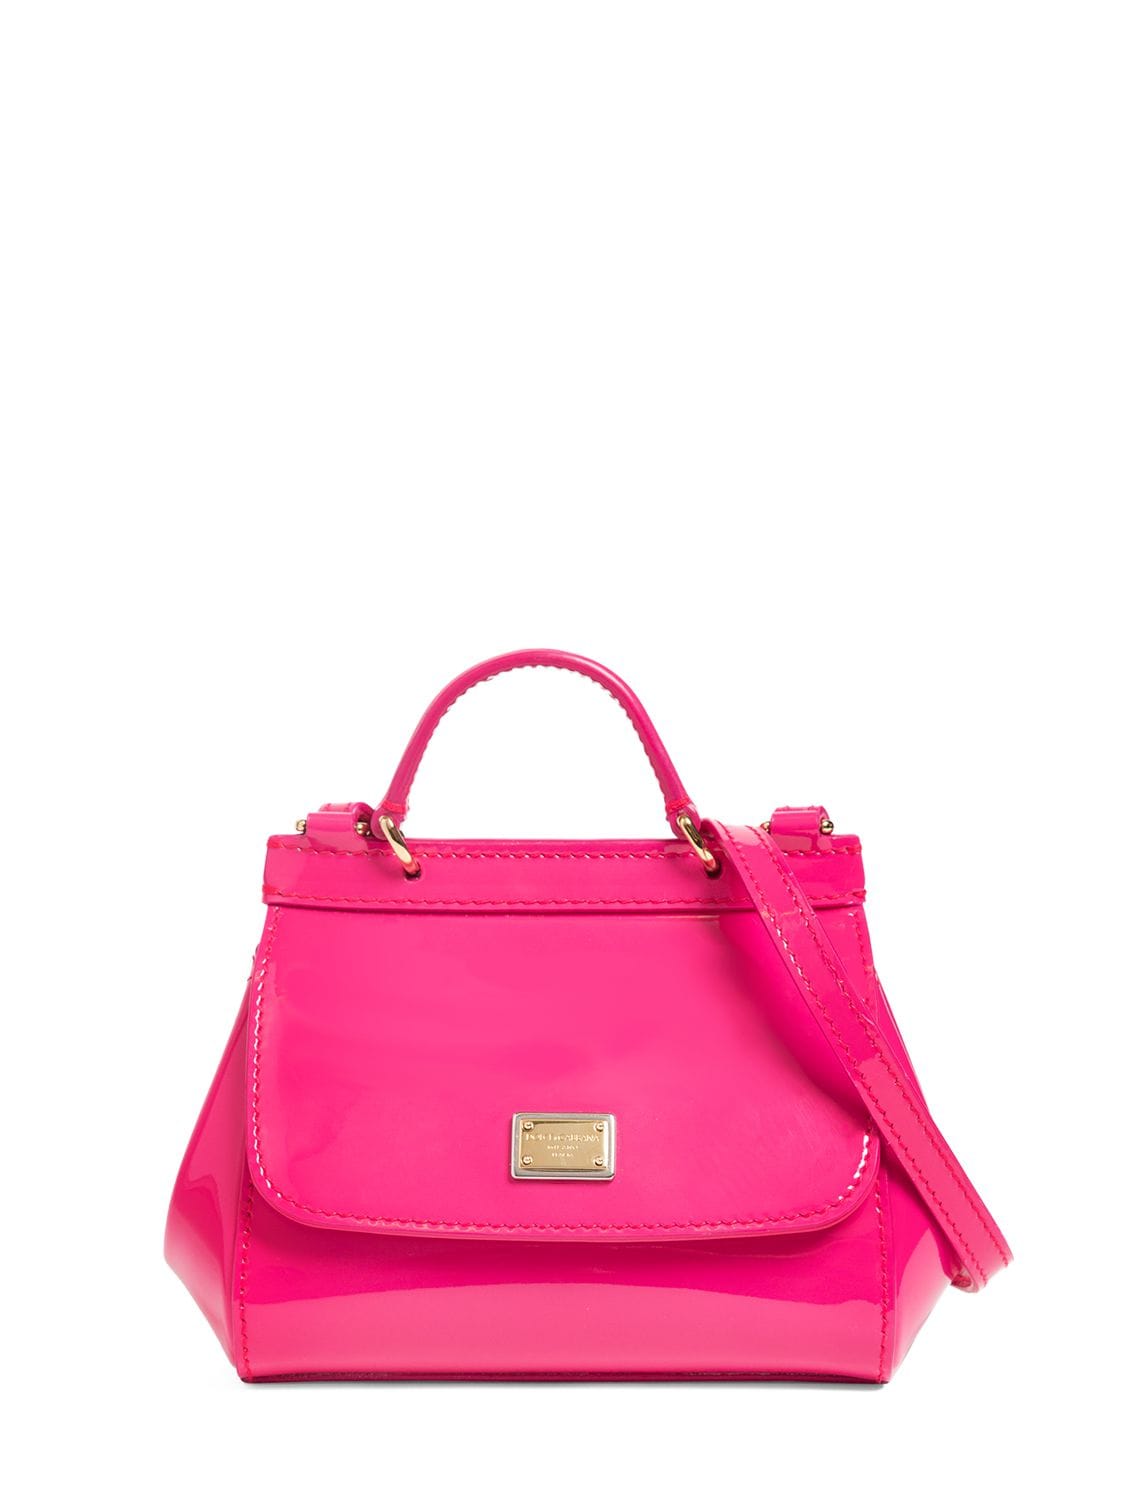 Dolce & Gabbana Kids Patent Leather Tote Bag - Pink